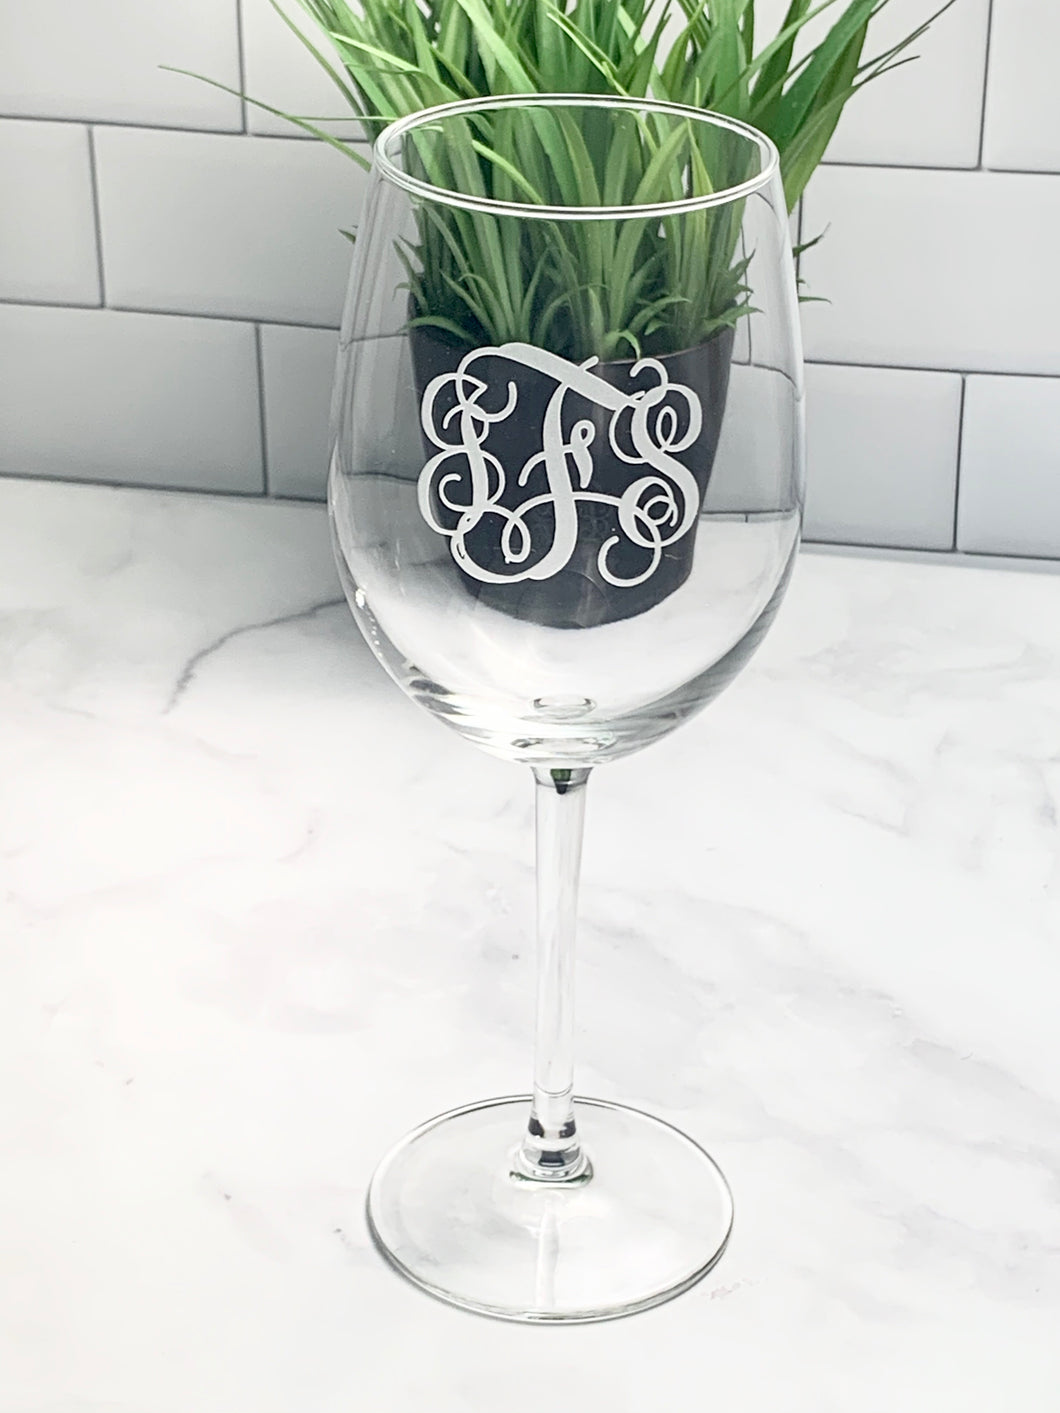 Etched Monogrammed Wine Glass, 16 oz